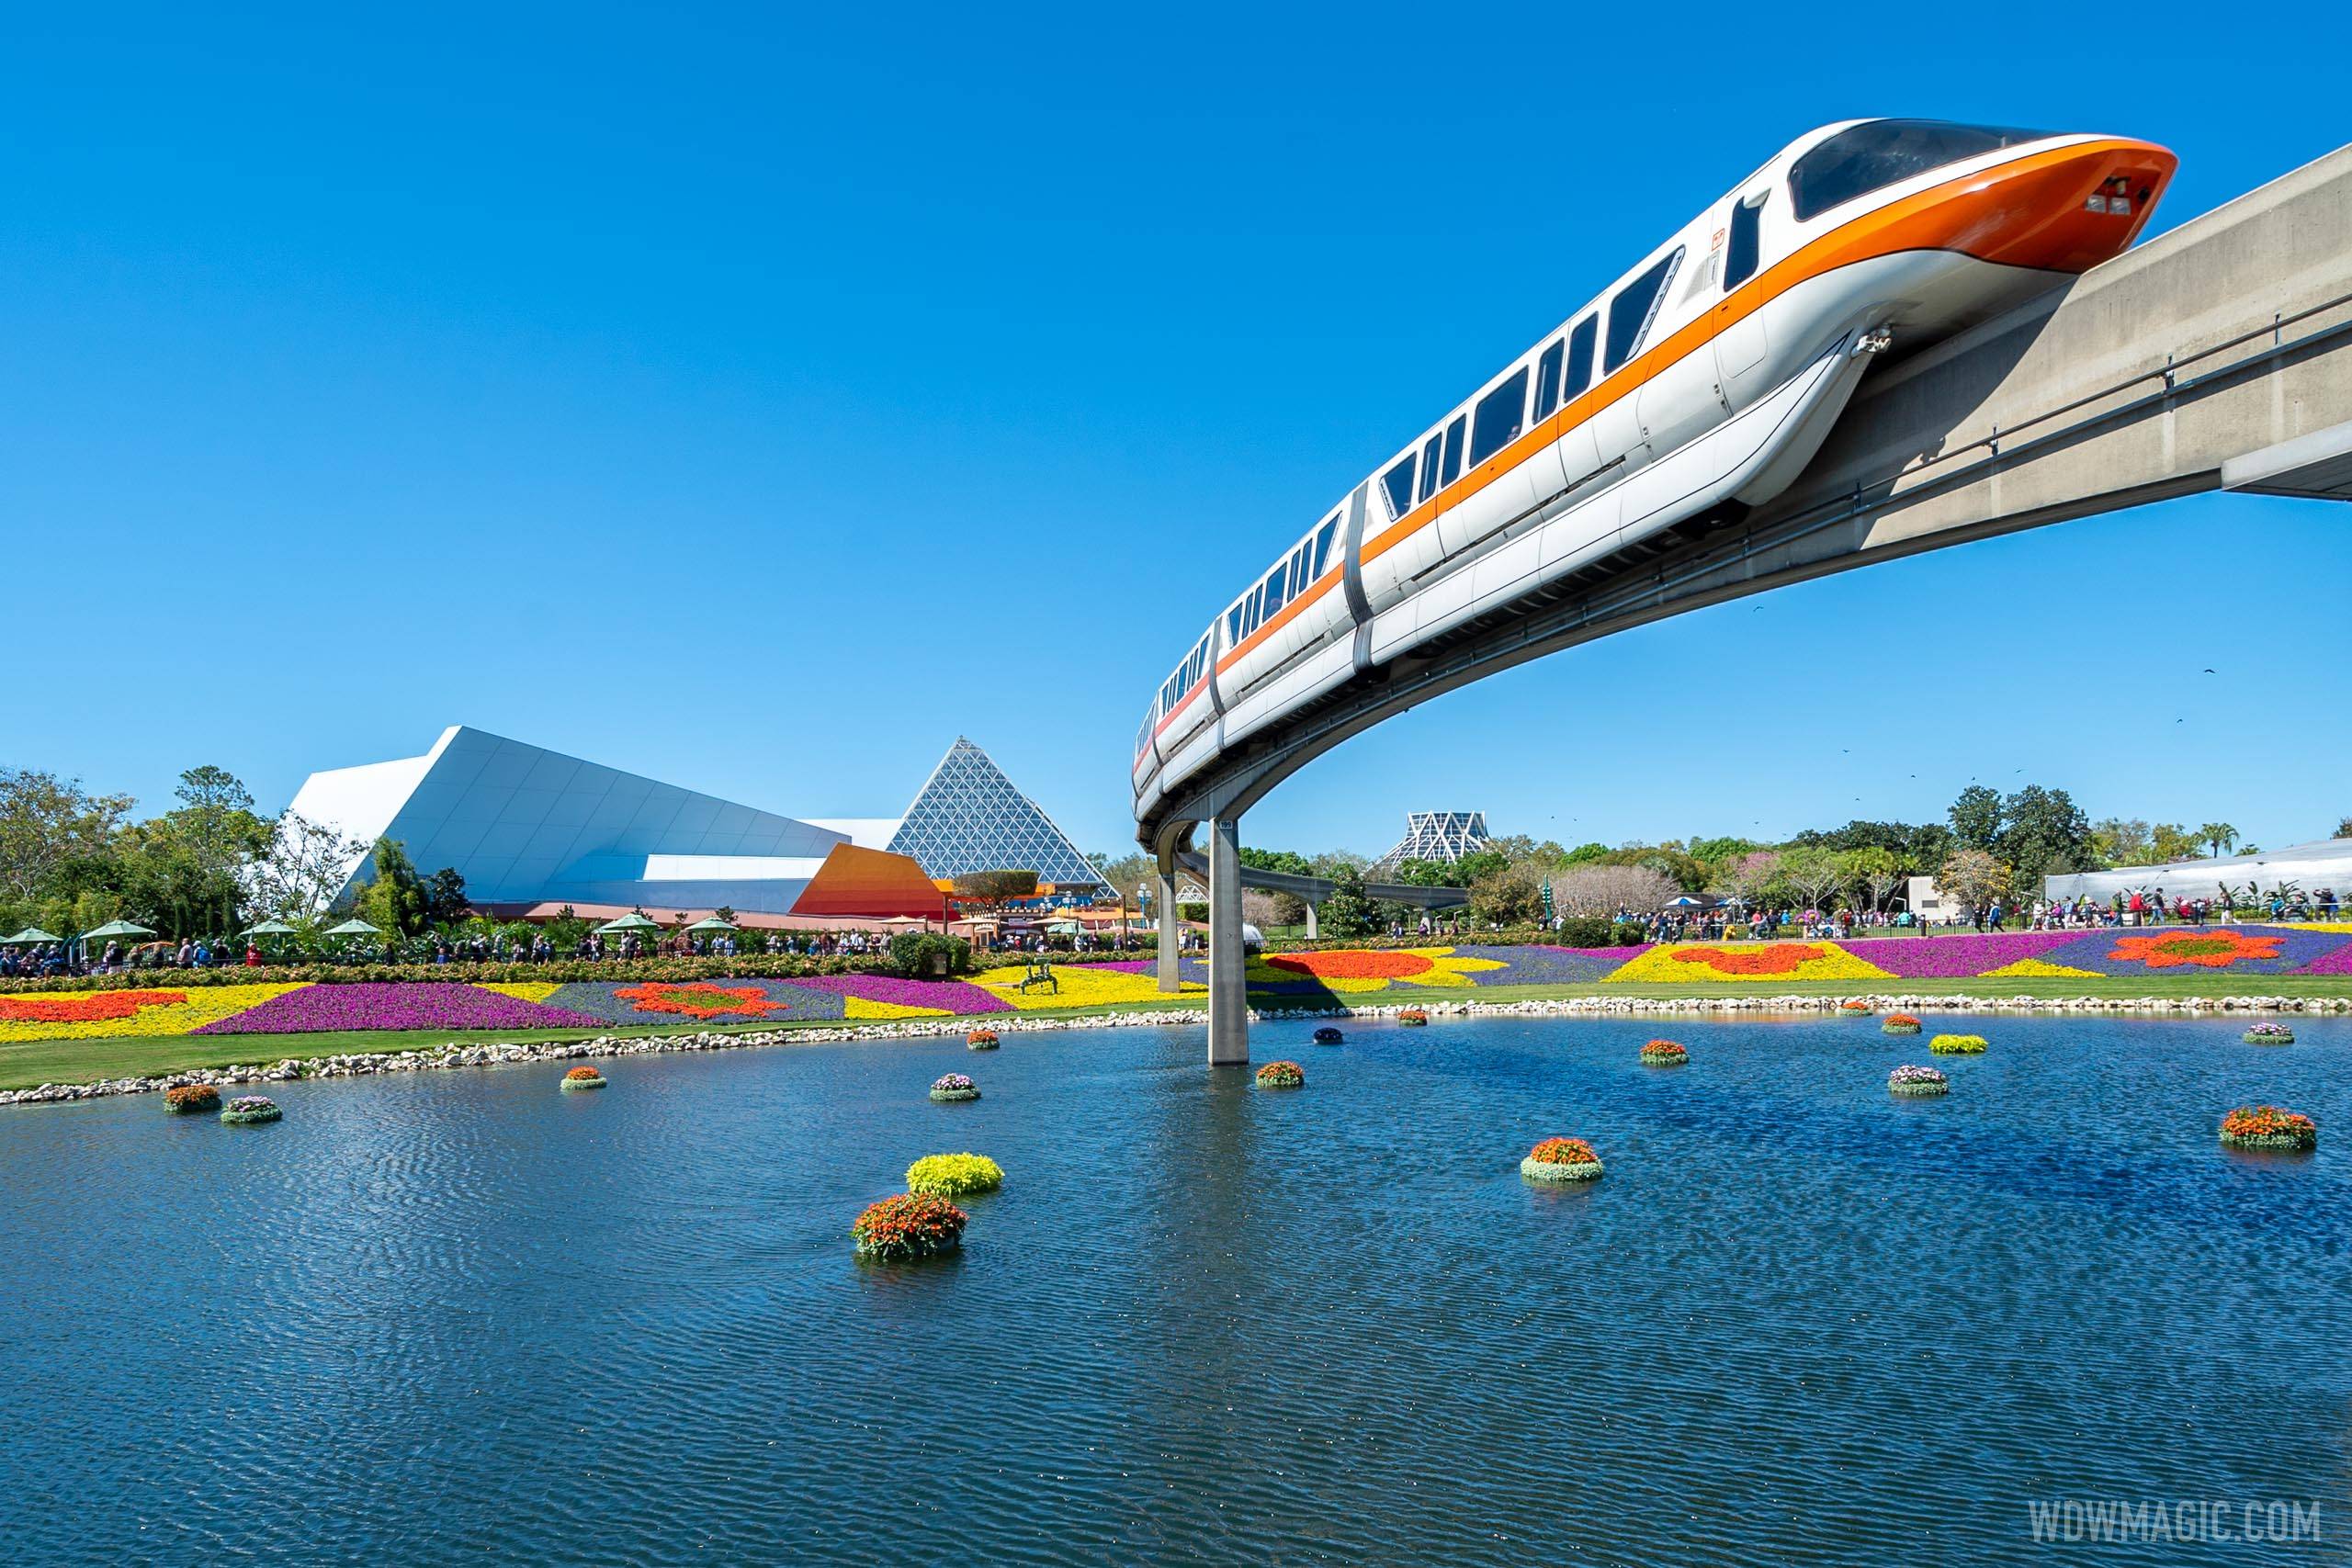 Florida Governor Ron DeSantis signs bIll to require state inspections of the Walt Disney World monorail system